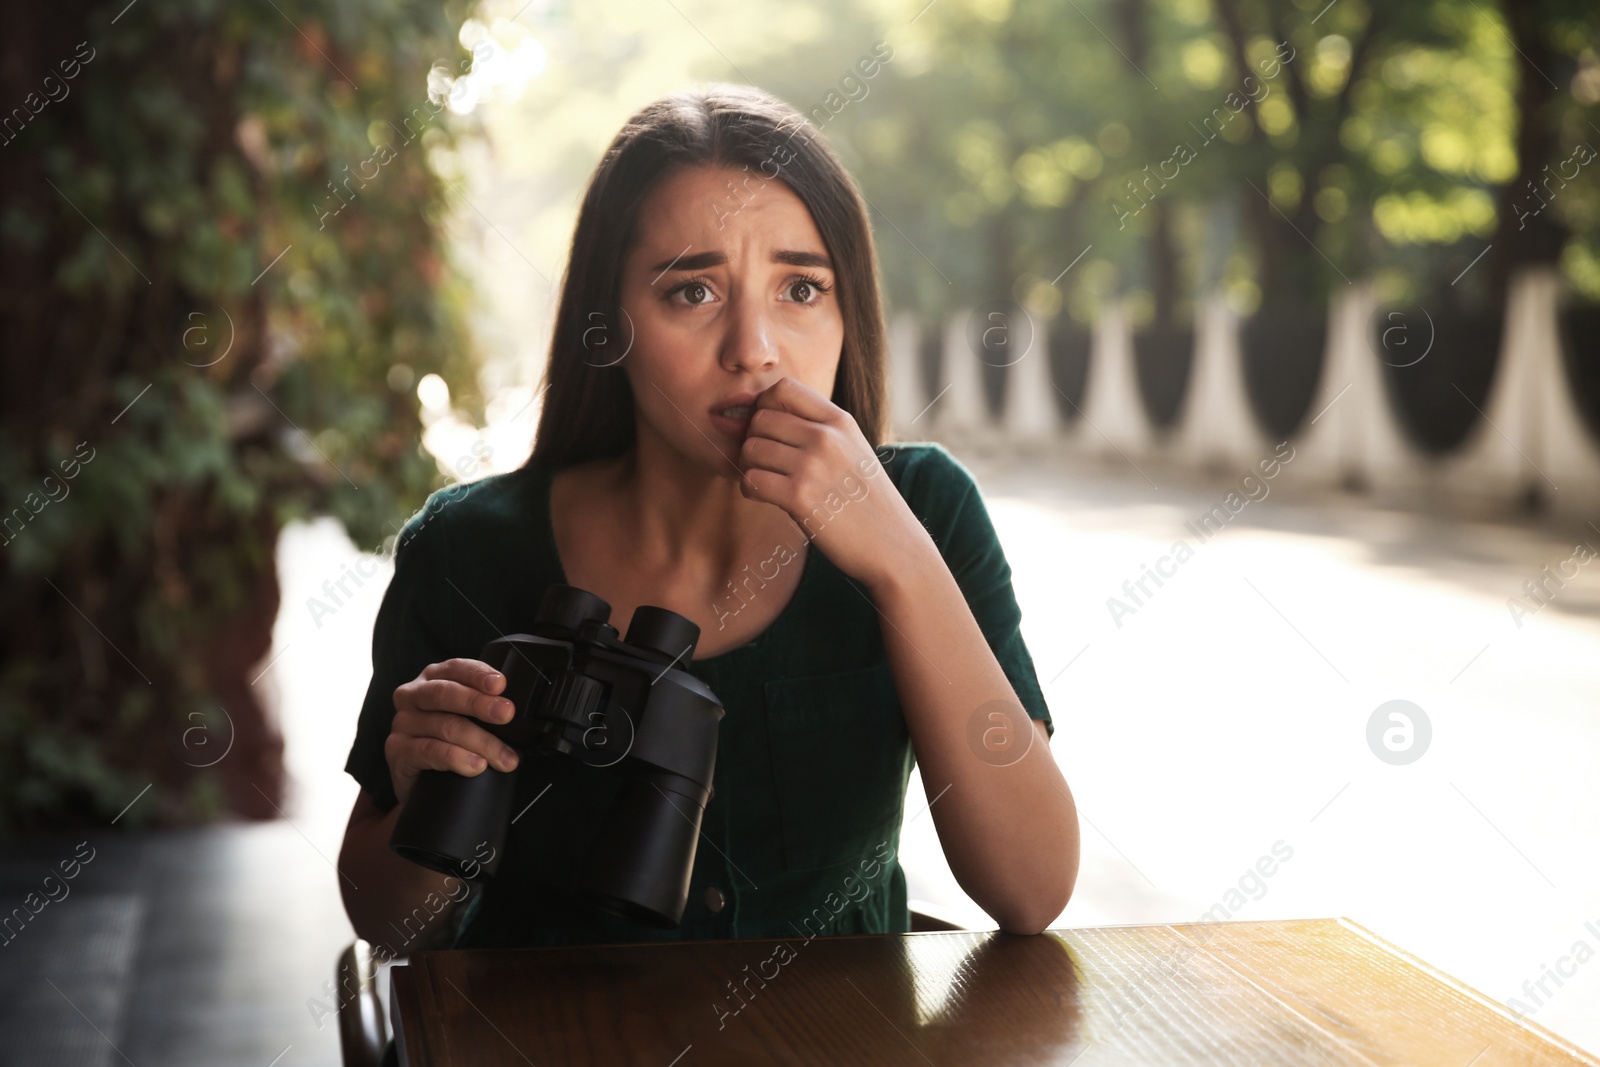 Photo of Jealous woman with binoculars spying on ex boyfriend in outdoor cafe